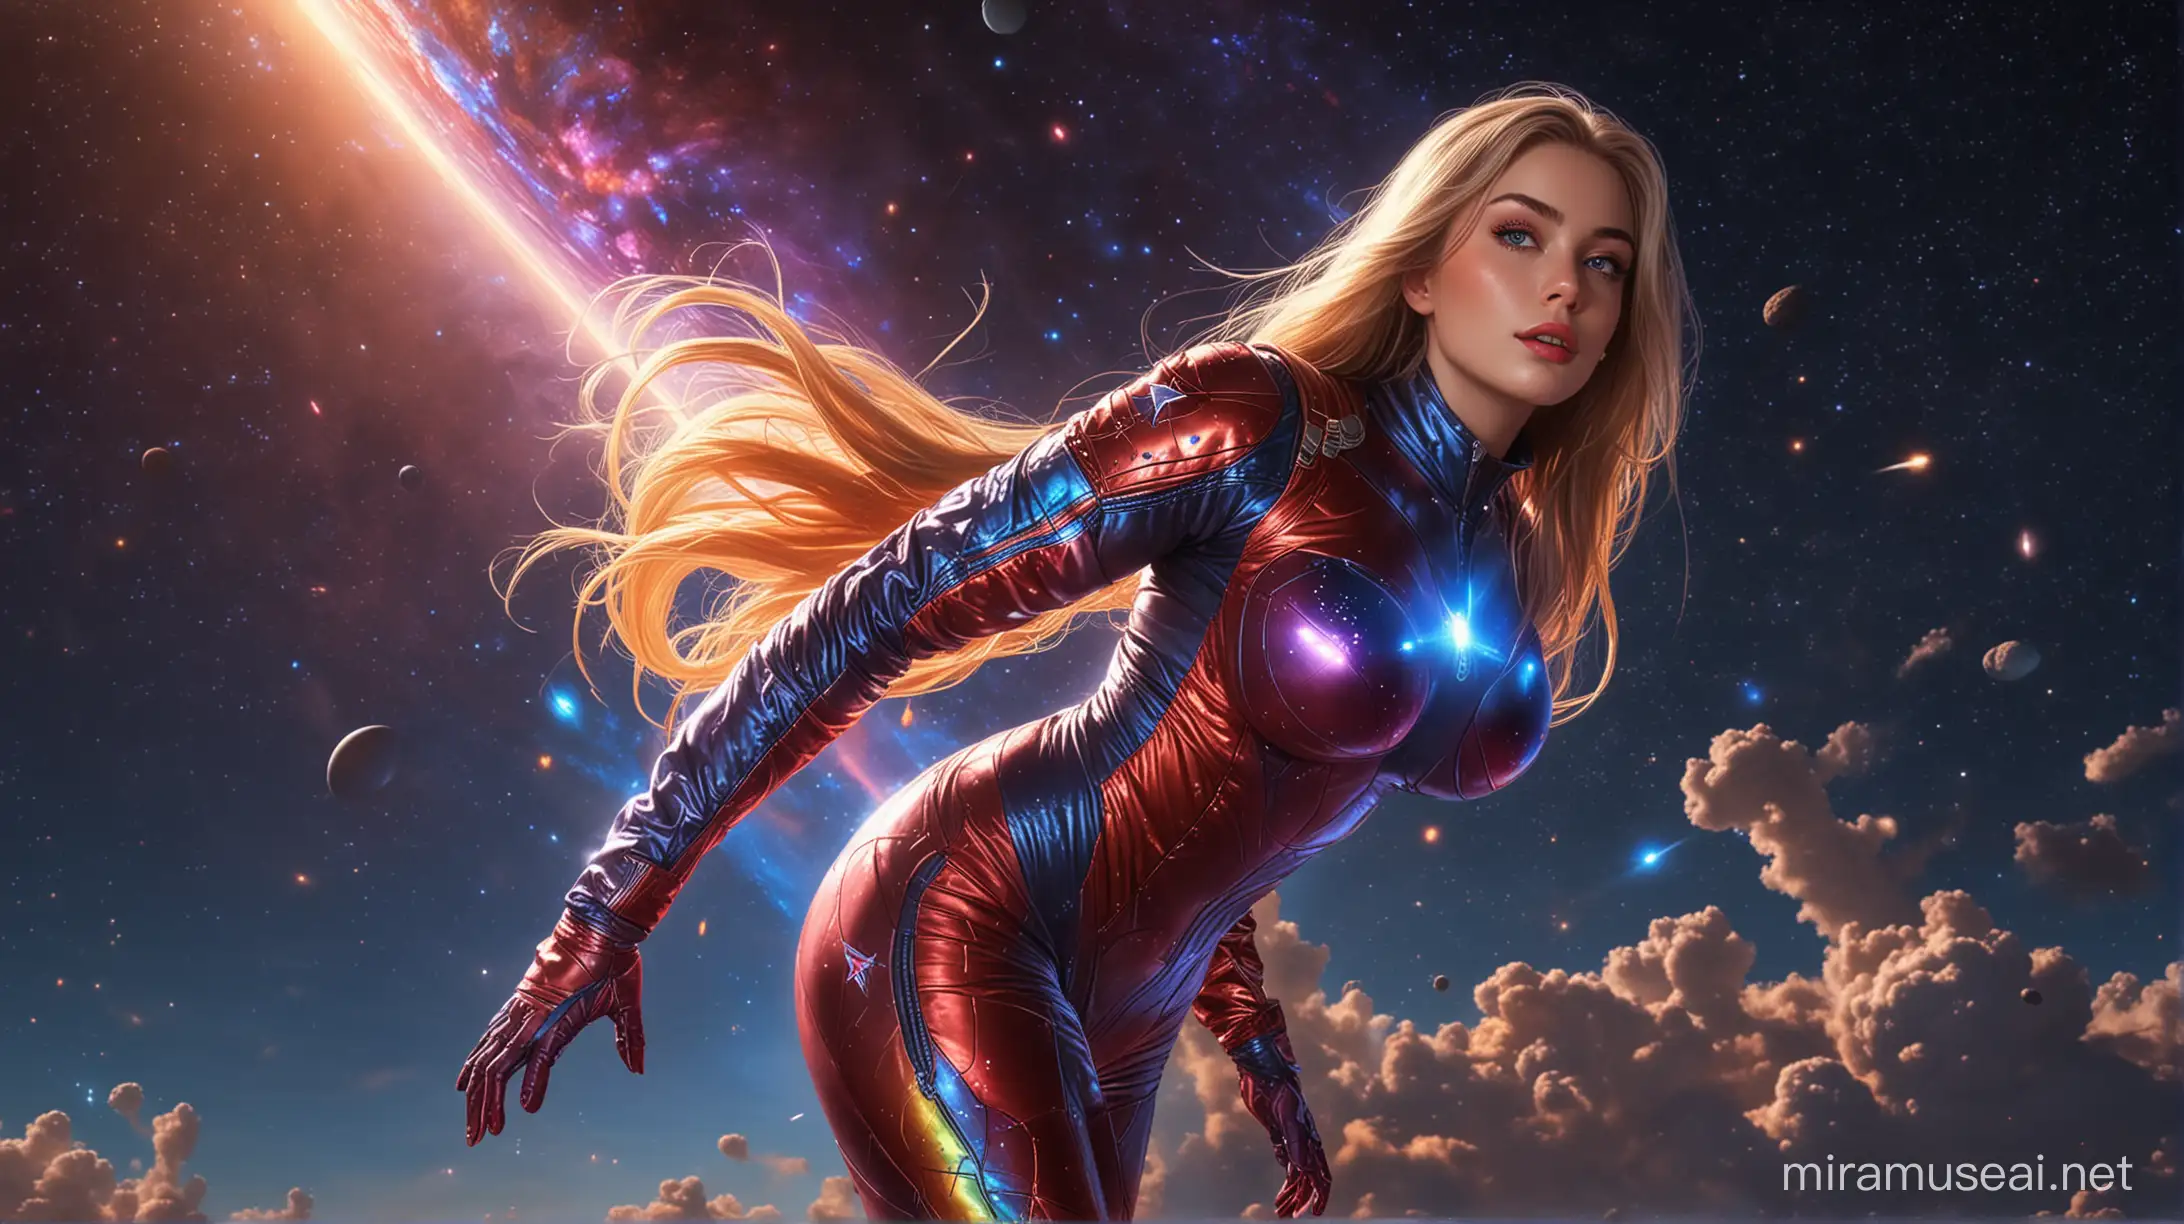 Radiant Girl in Rainbow Spacesuit Amid Galactic Explosions